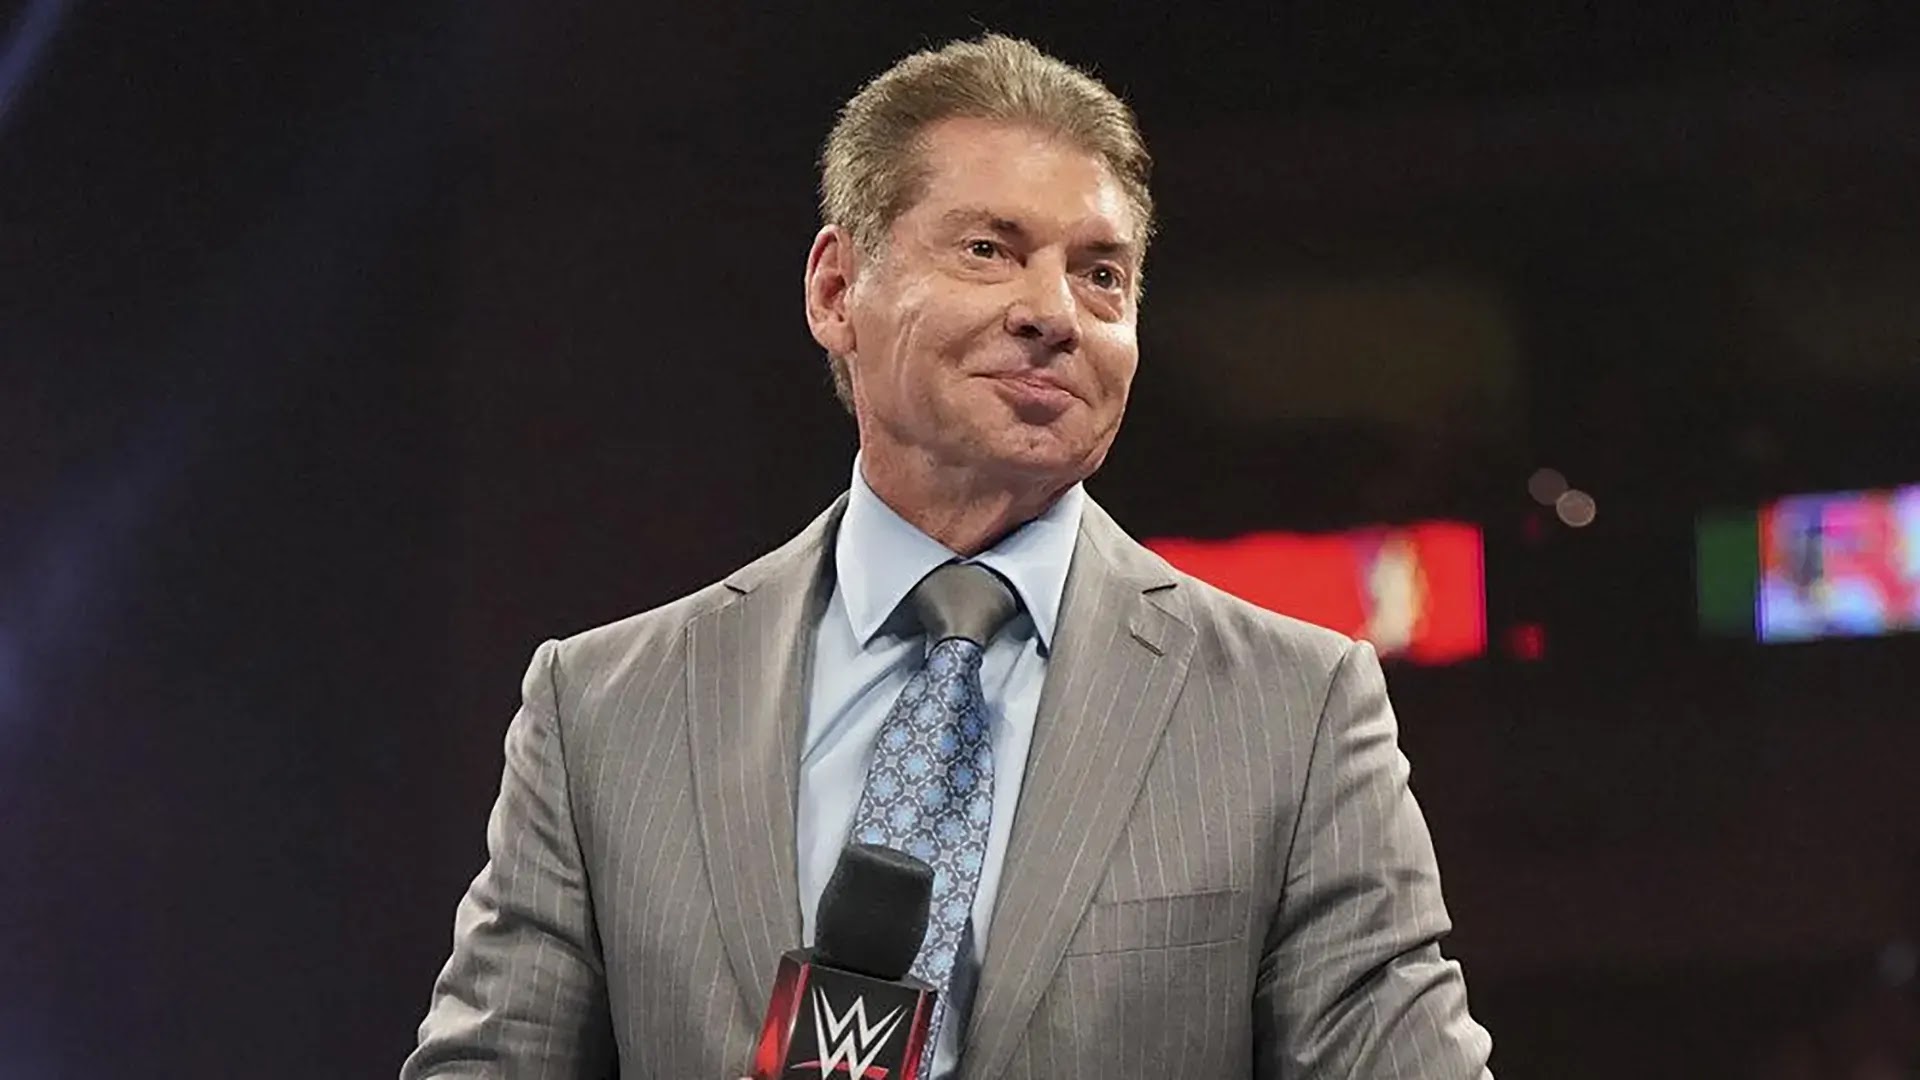 Vince McMahon Announces Retirement From WWE, Stephanie McMahon & Nick Khan Appointed As Co-CEOs Of WWE